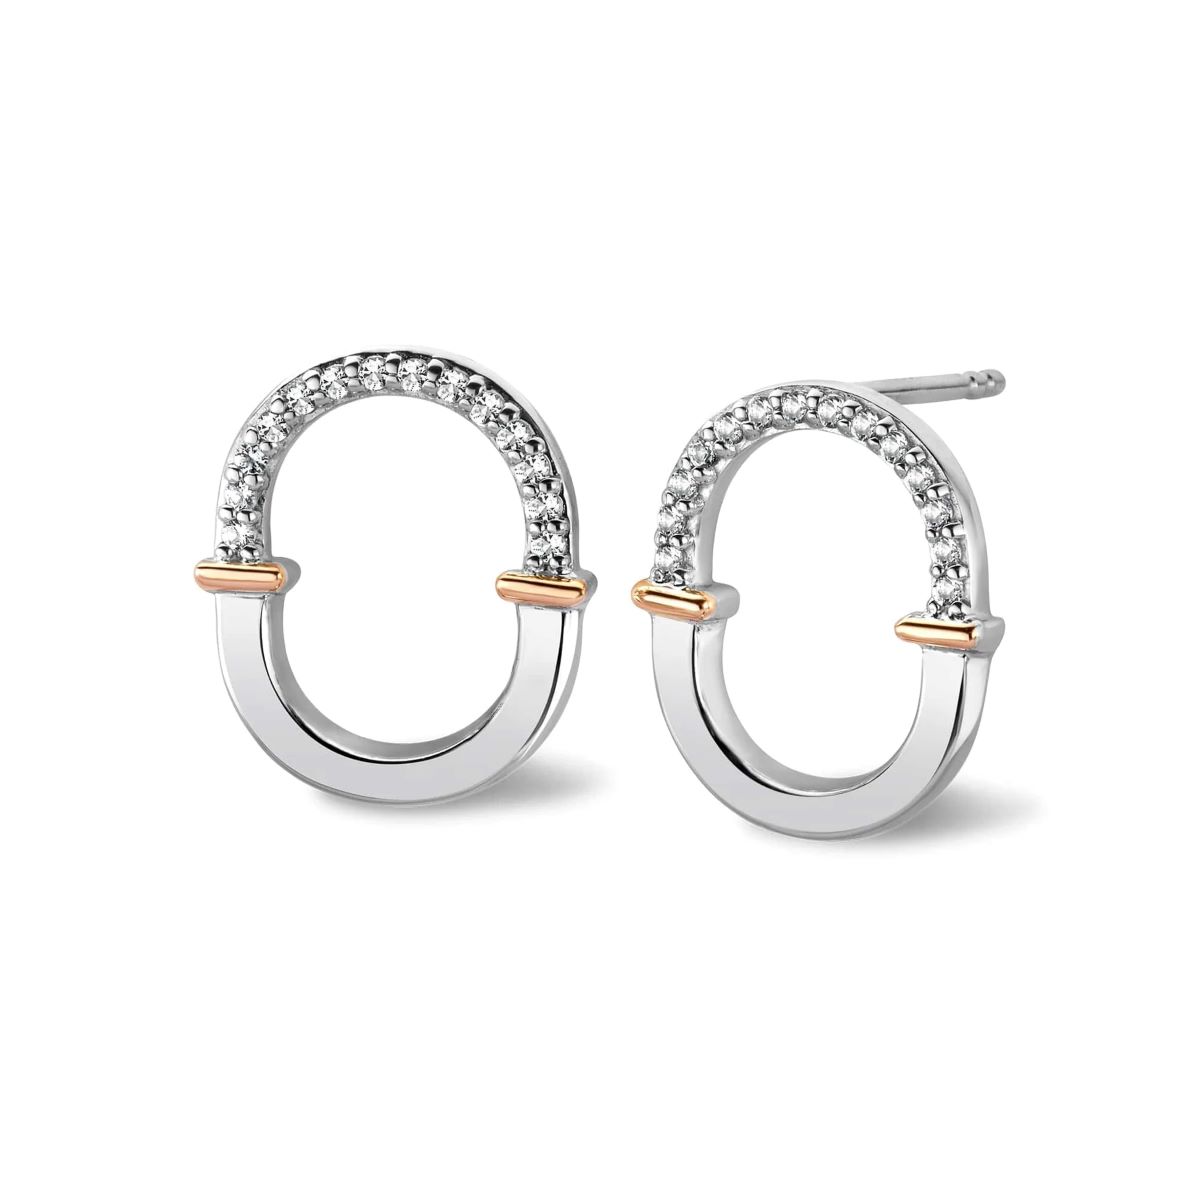 Clogau Connection Silver Earrings - 3SCRL0743